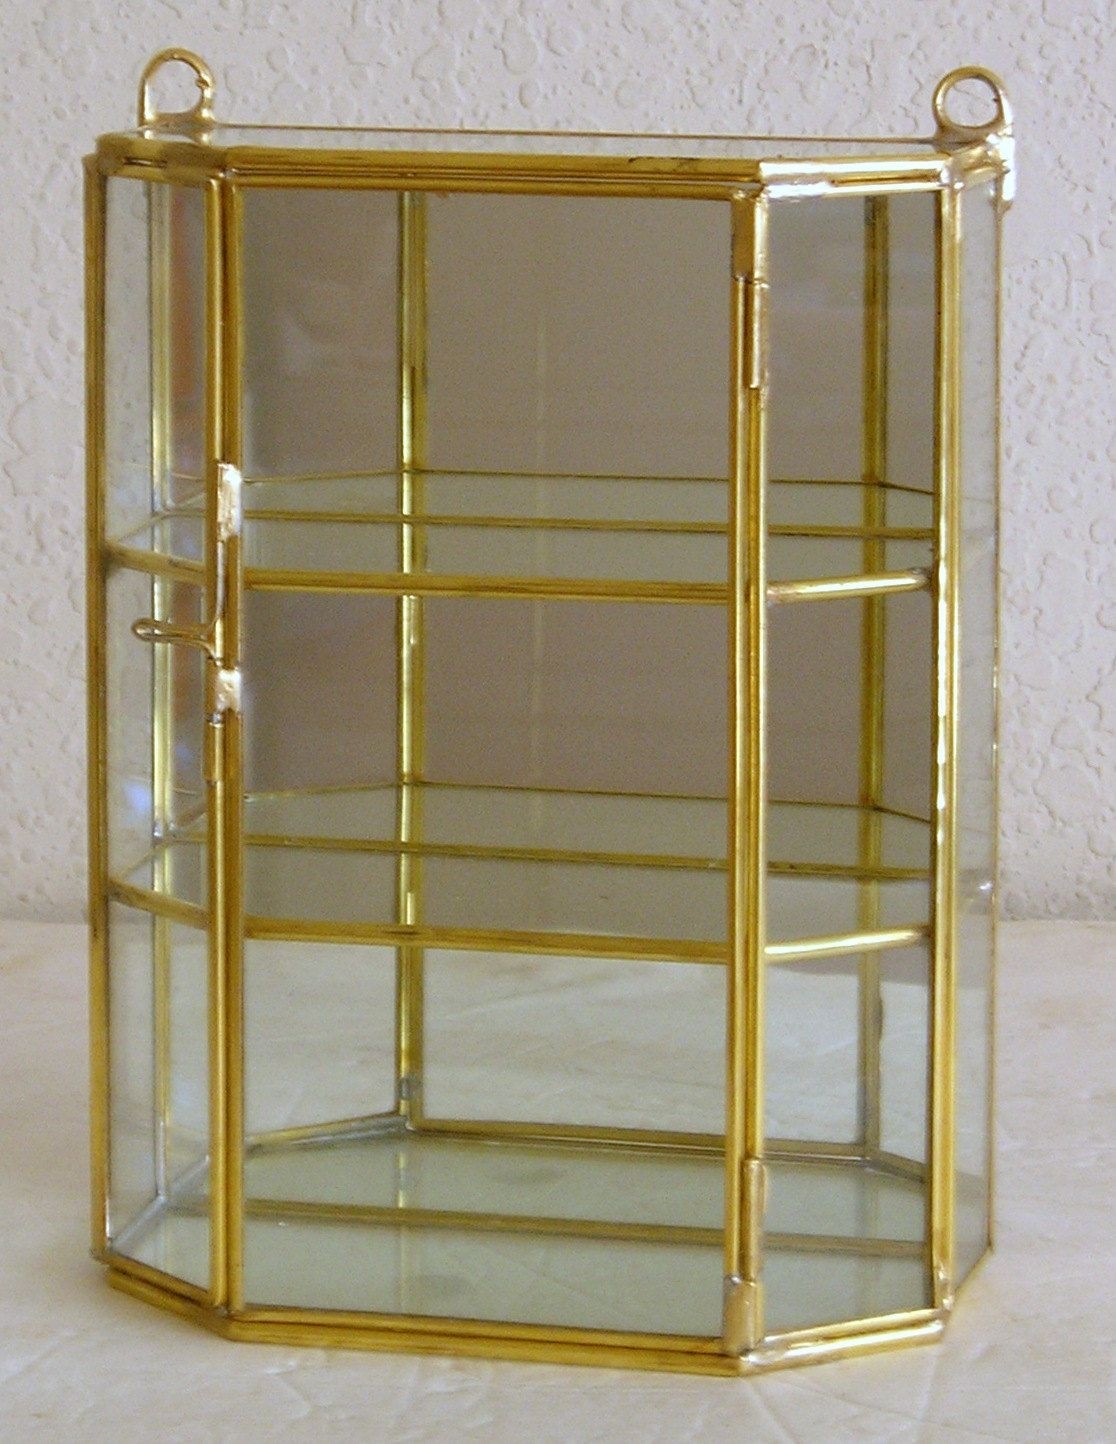 New brass and glass mirrored small display curio cabinet